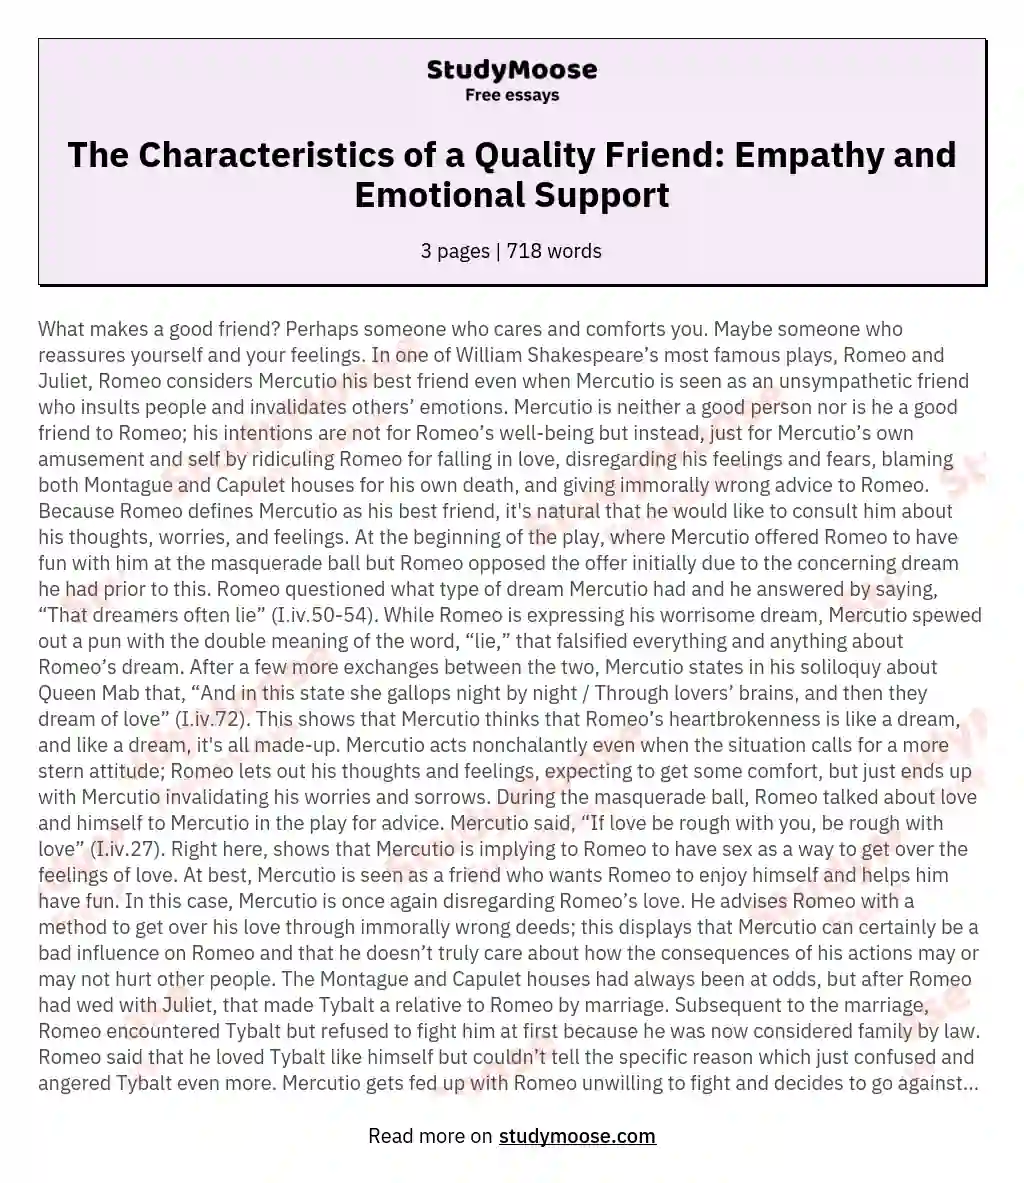 The Characteristics of a Quality Friend: Empathy and Emotional Support essay